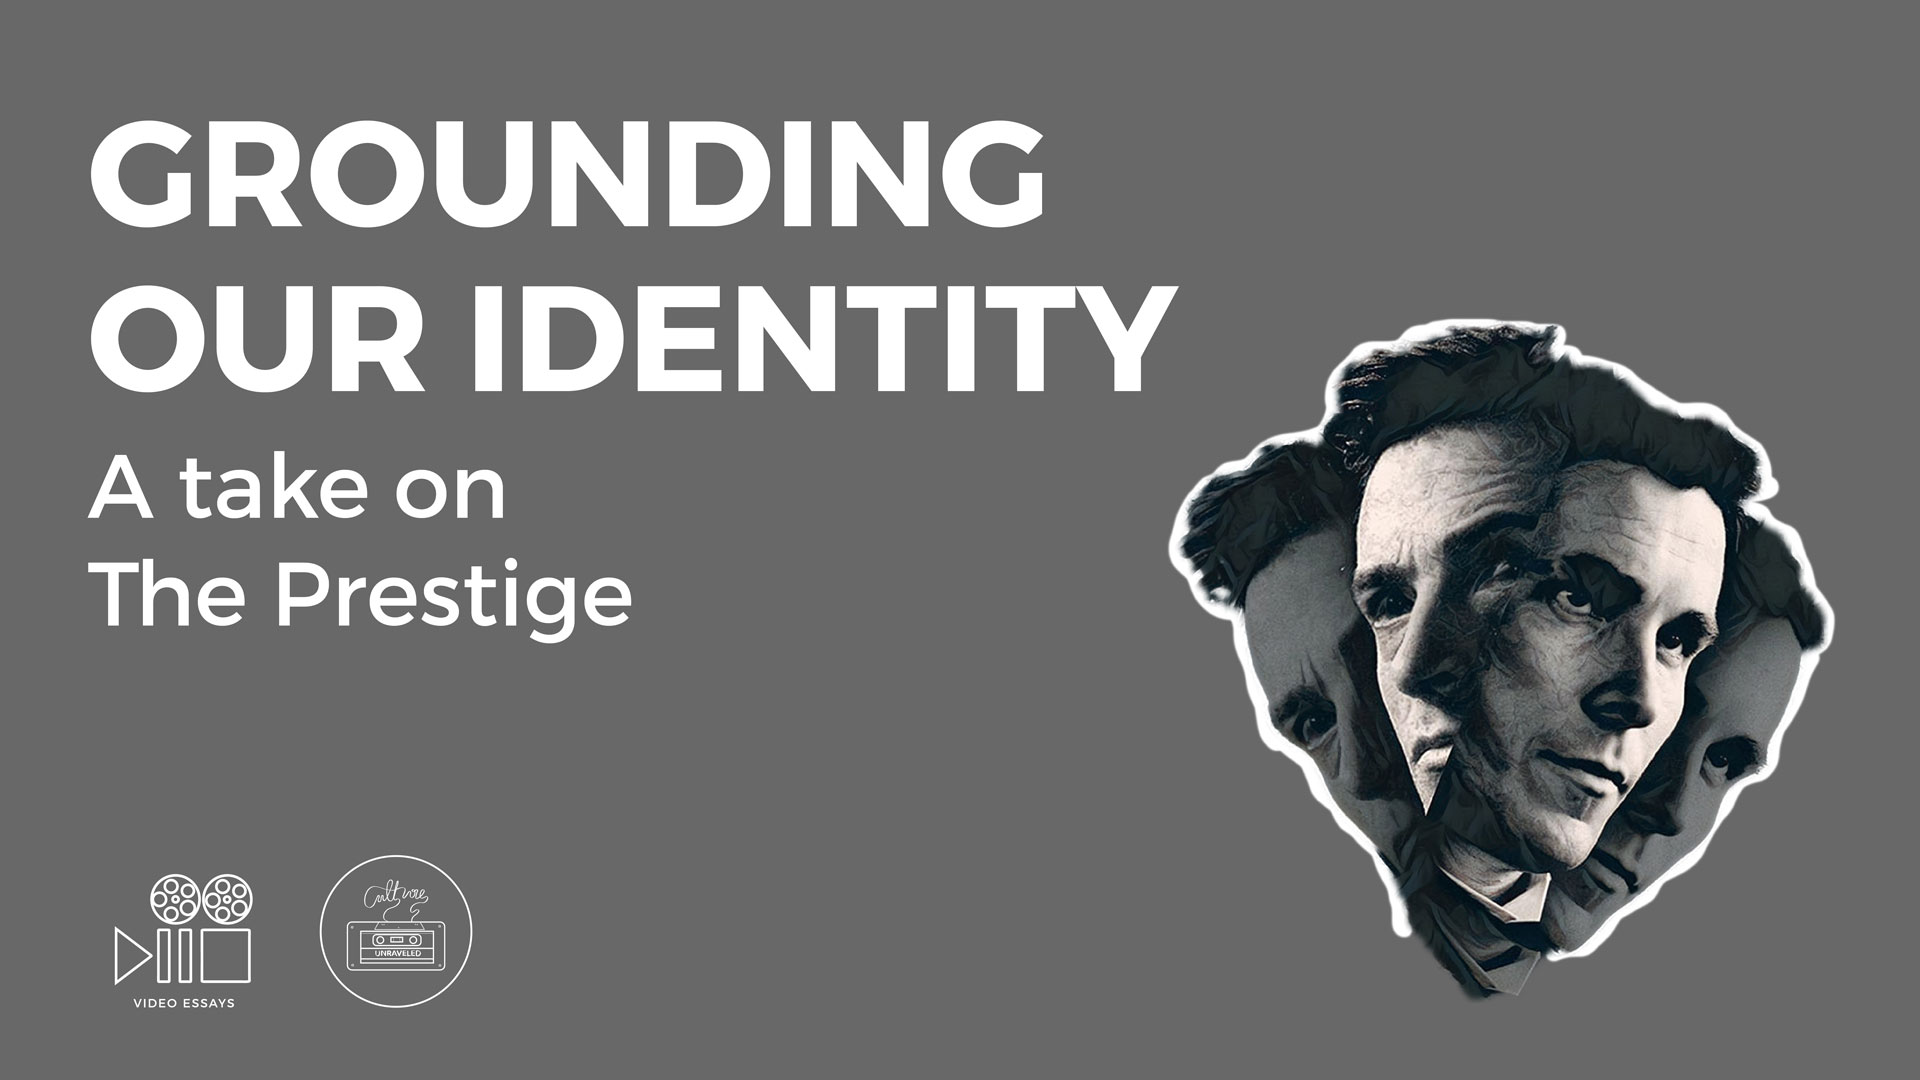 Grounding our Identity